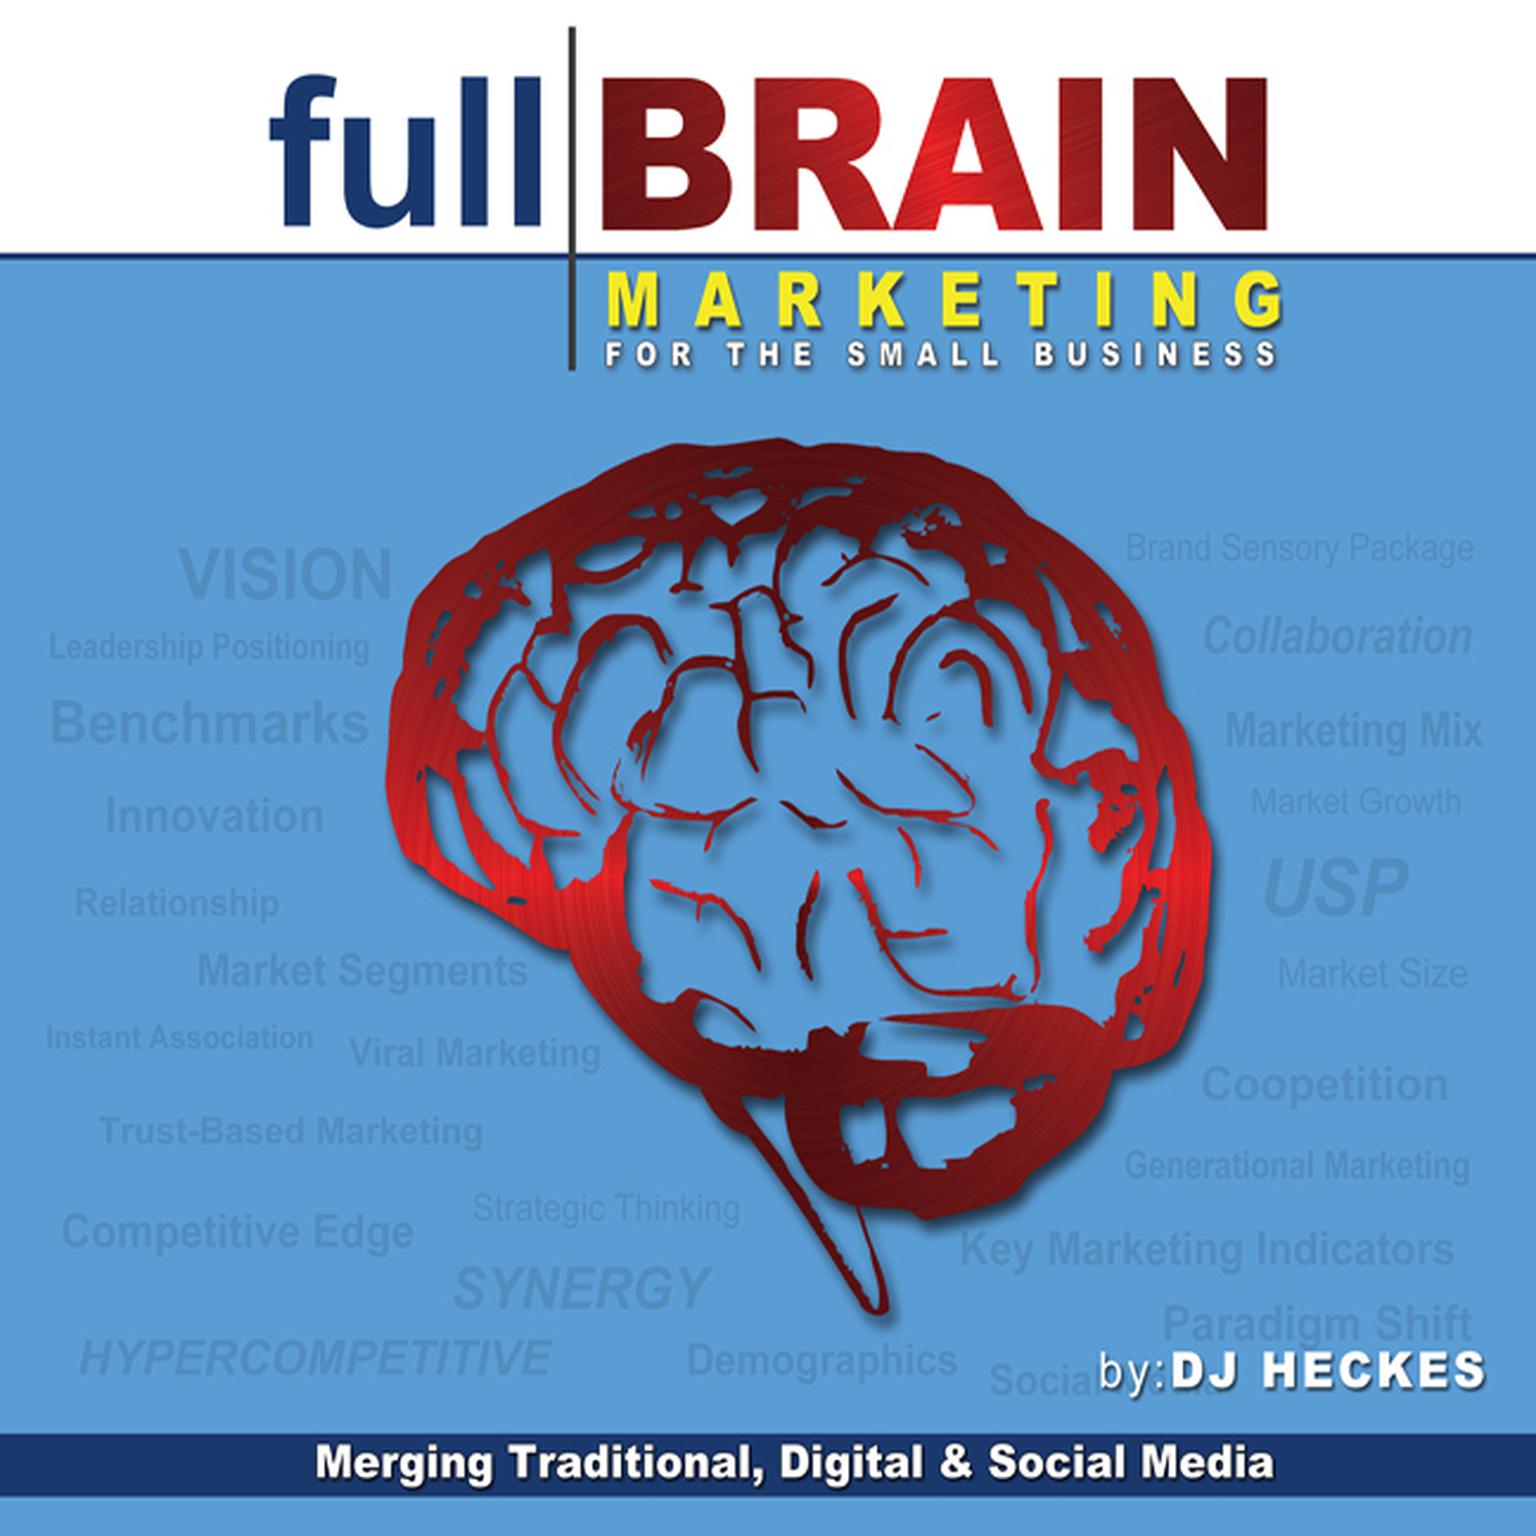 Full Brain Marketing for the Small Business: Merging Traditional, Digital & Social Media Audiobook, by DJ Heckes